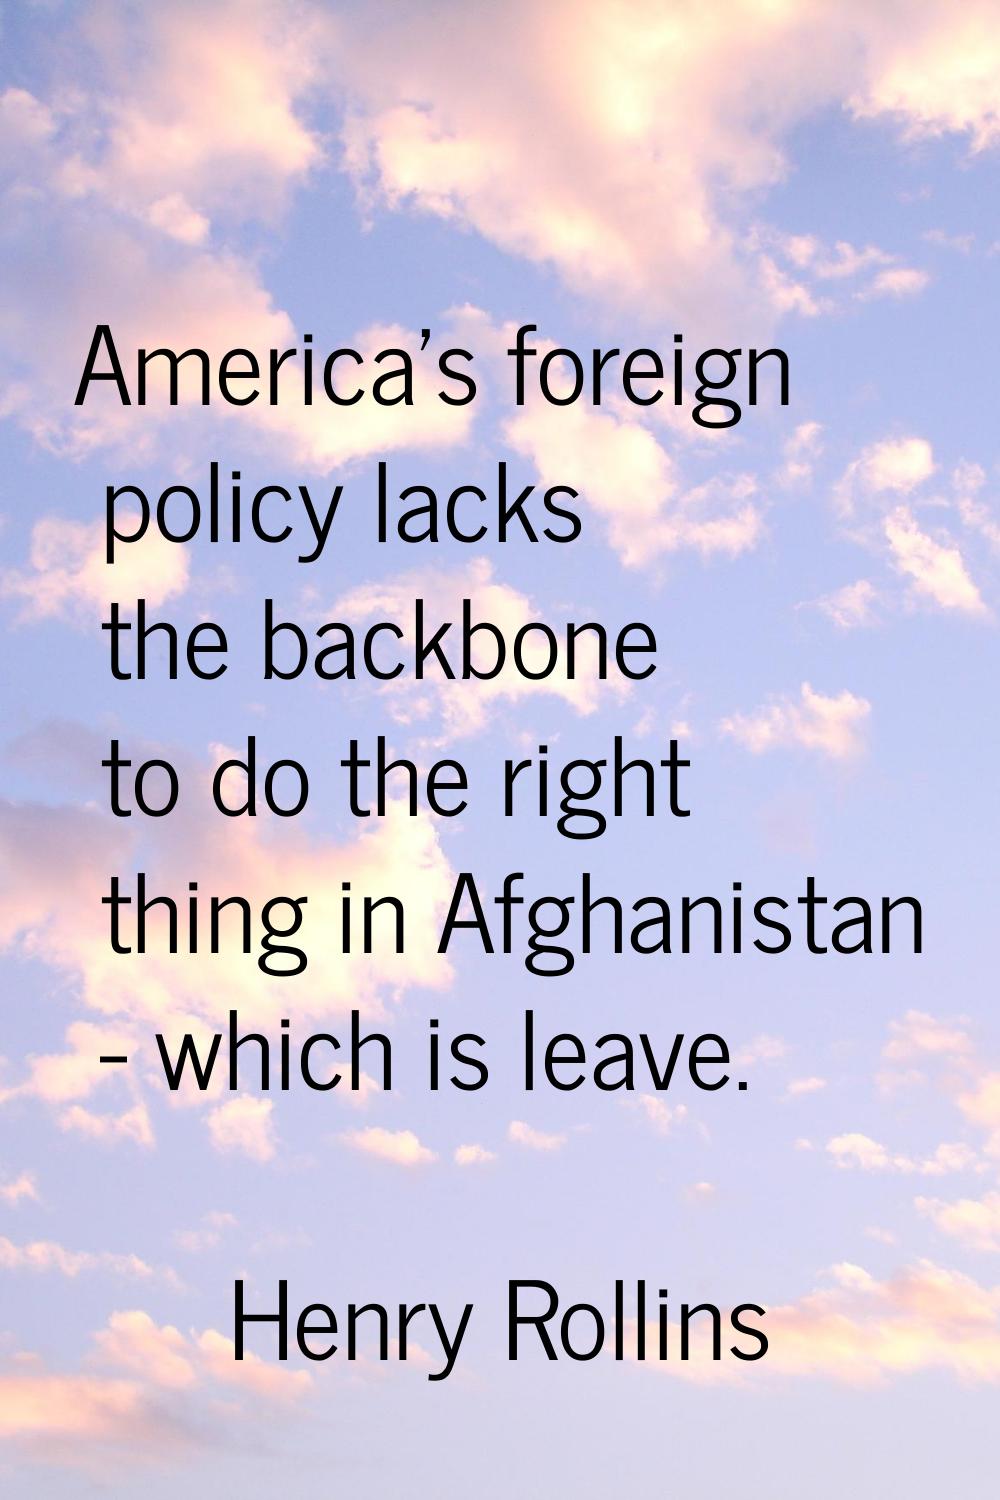 America's foreign policy lacks the backbone to do the right thing in Afghanistan - which is leave.